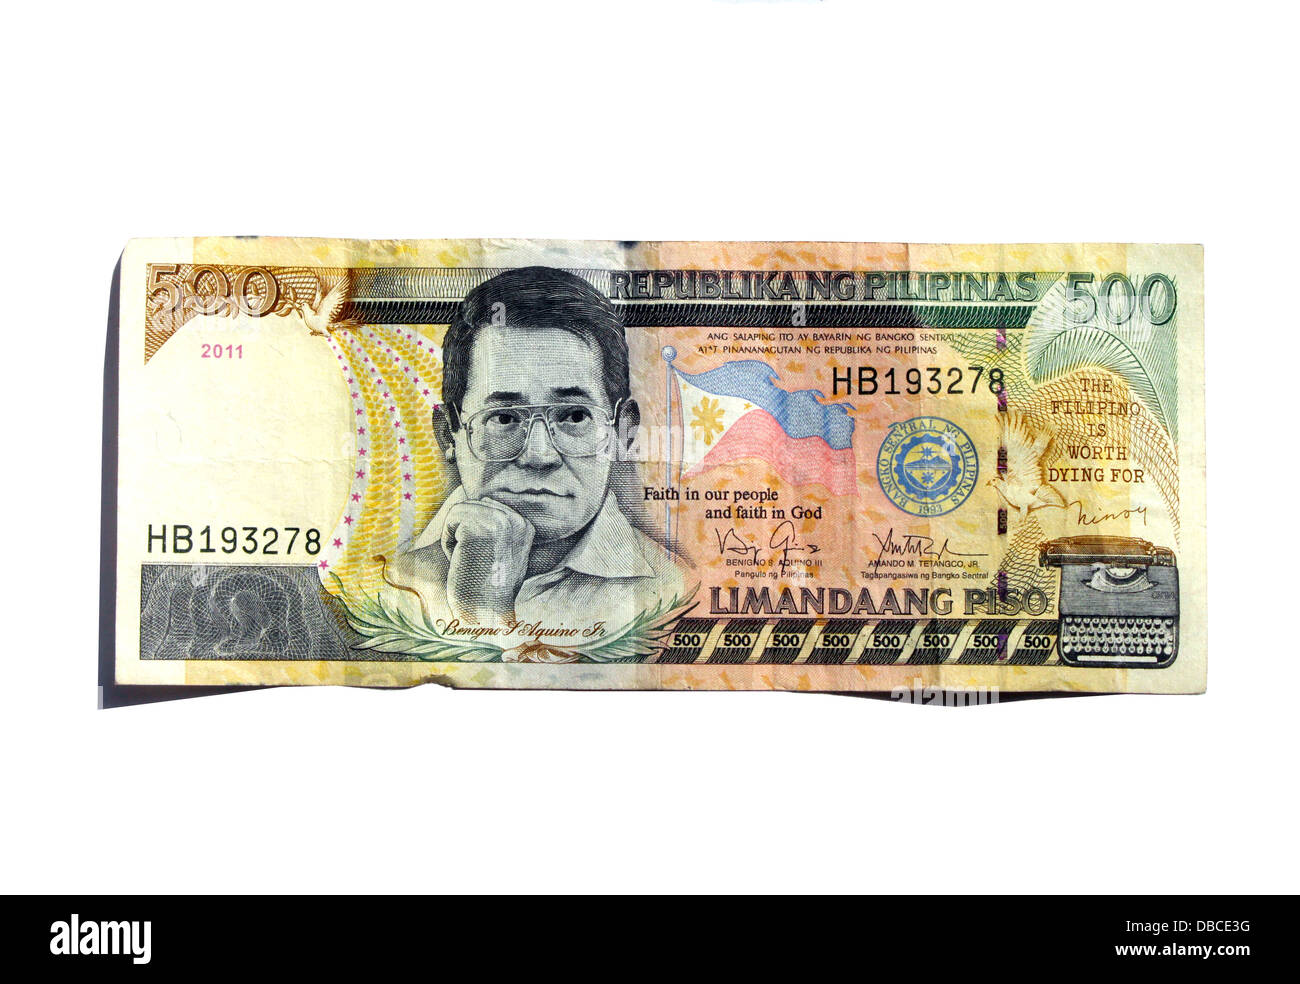 500 Philippine Peso Old Banknote Currency Money Circulated 2011